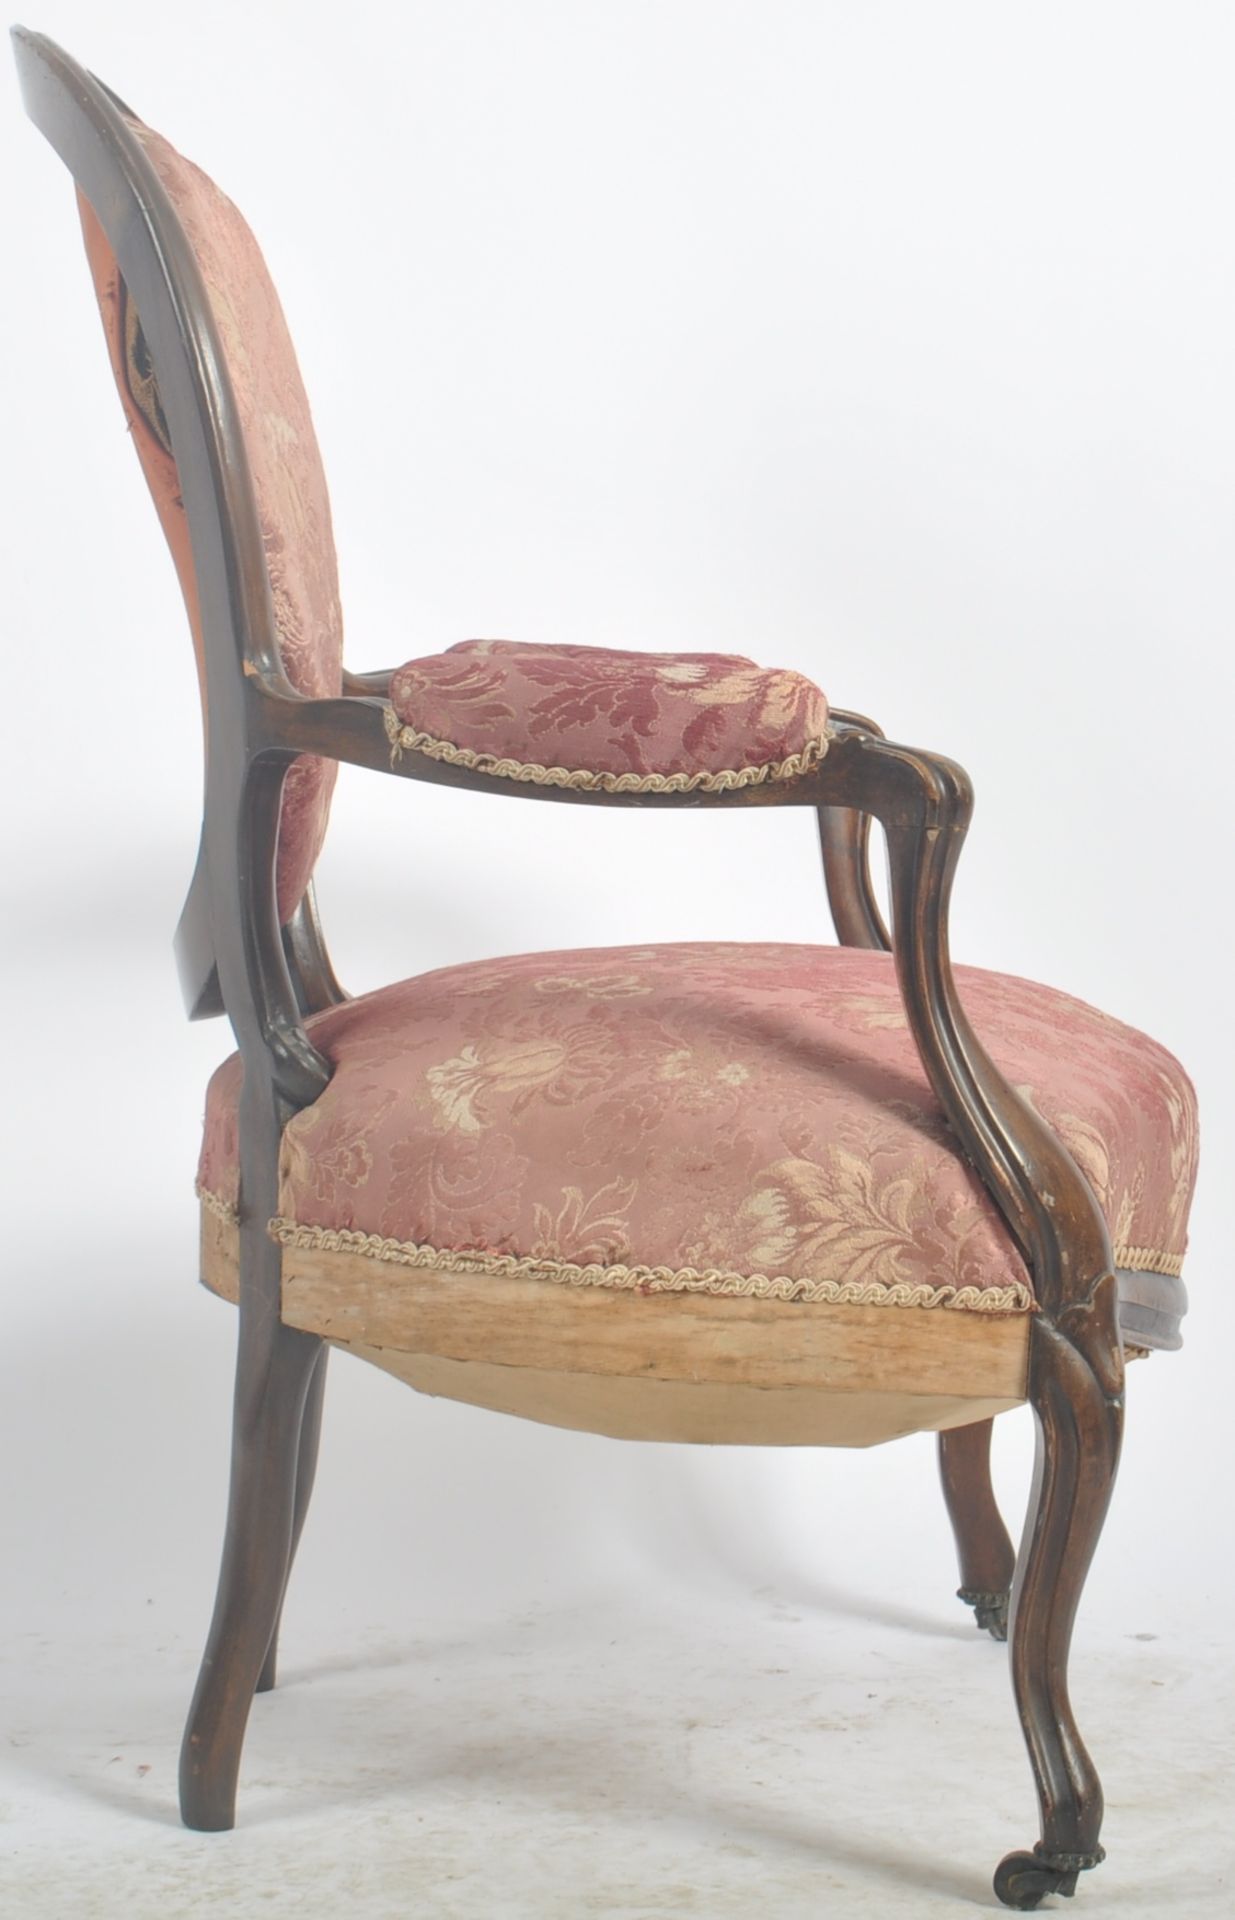 19TH CENTURY VICTORIAN ROSEWOOD SALON CHAIR - Image 5 of 6